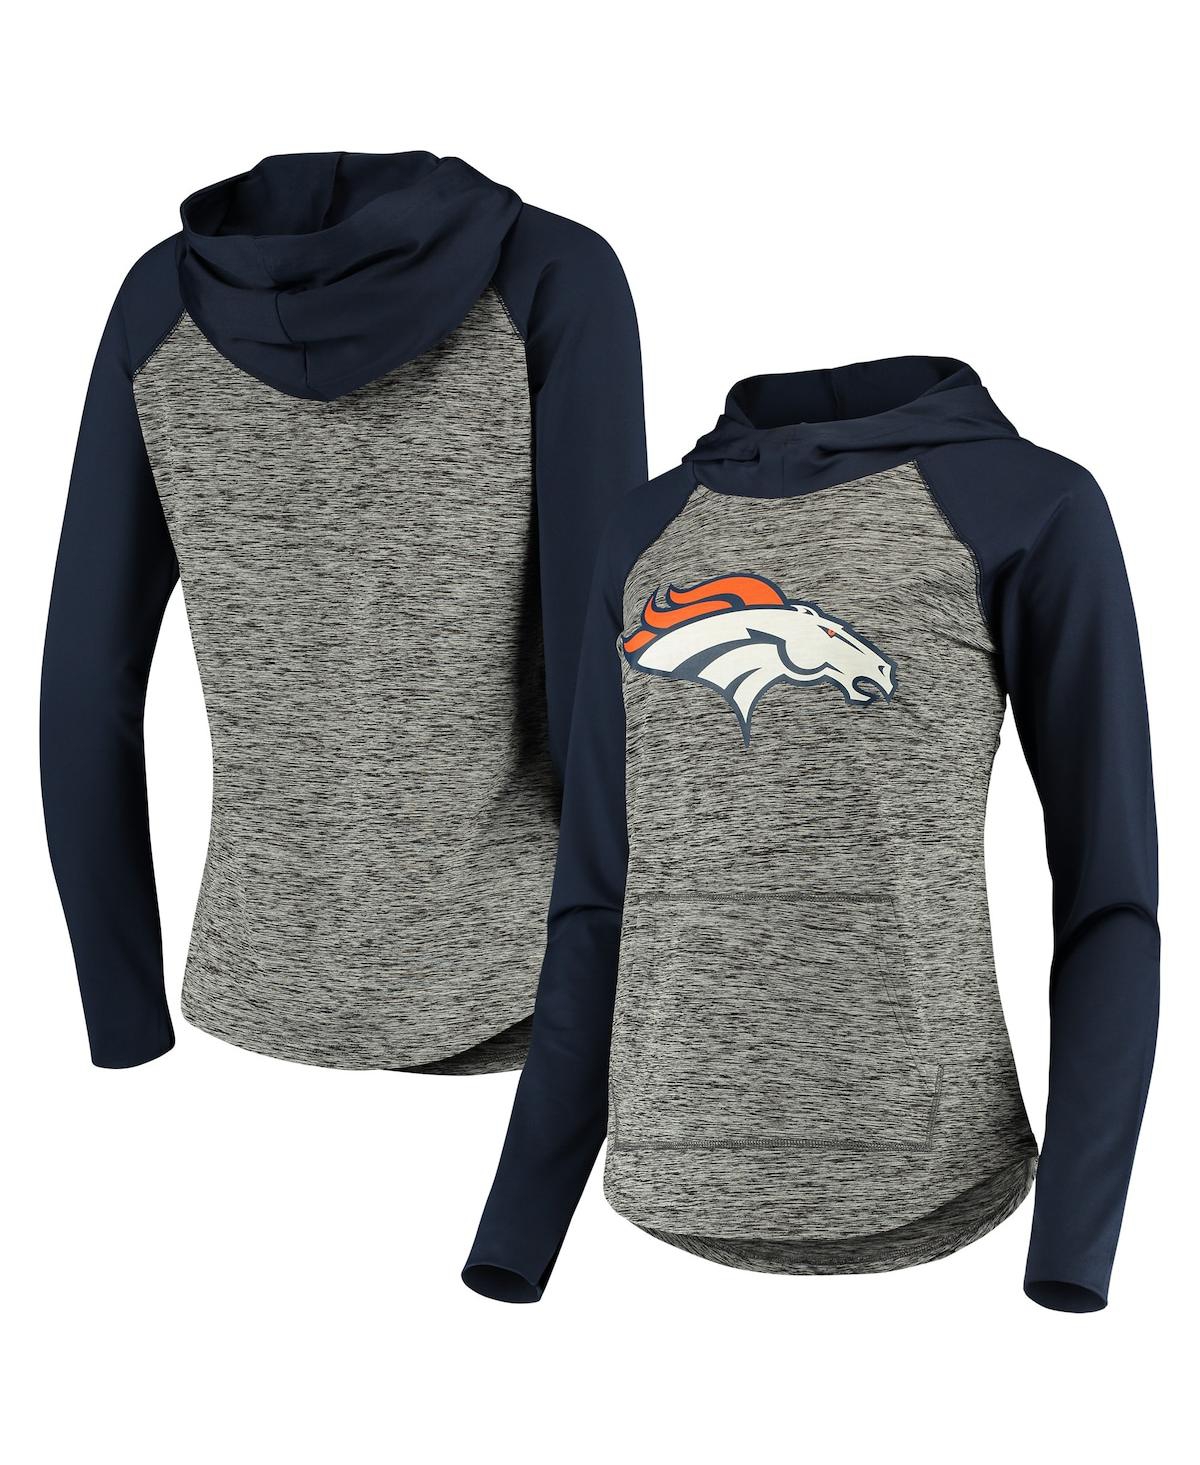 G-III 4HER BY CARL BANKS WOMEN'S G-III 4HER BY CARL BANKS HEATHER GRAY, ORANGE DENVER BRONCOS CHAMPIONSHIP RING PULLOVER HOOD